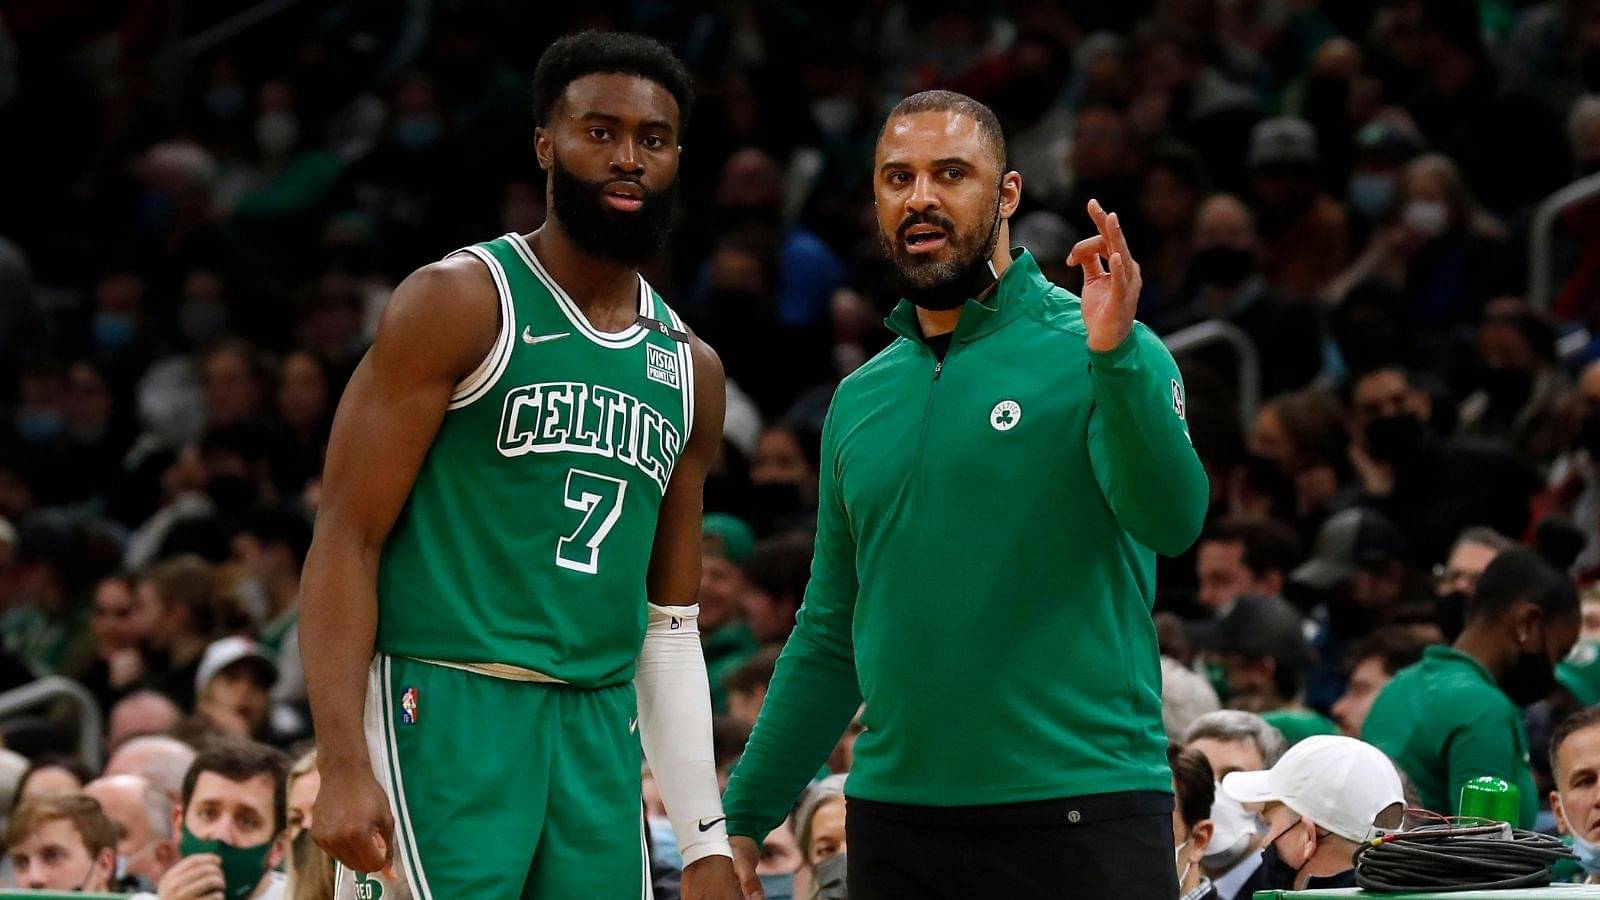 "Jaylen Brown has decided to take over for the Celtics!": Coach Ime Udoka and Al Horford praise star guard for being the much-needed leader for the team off late